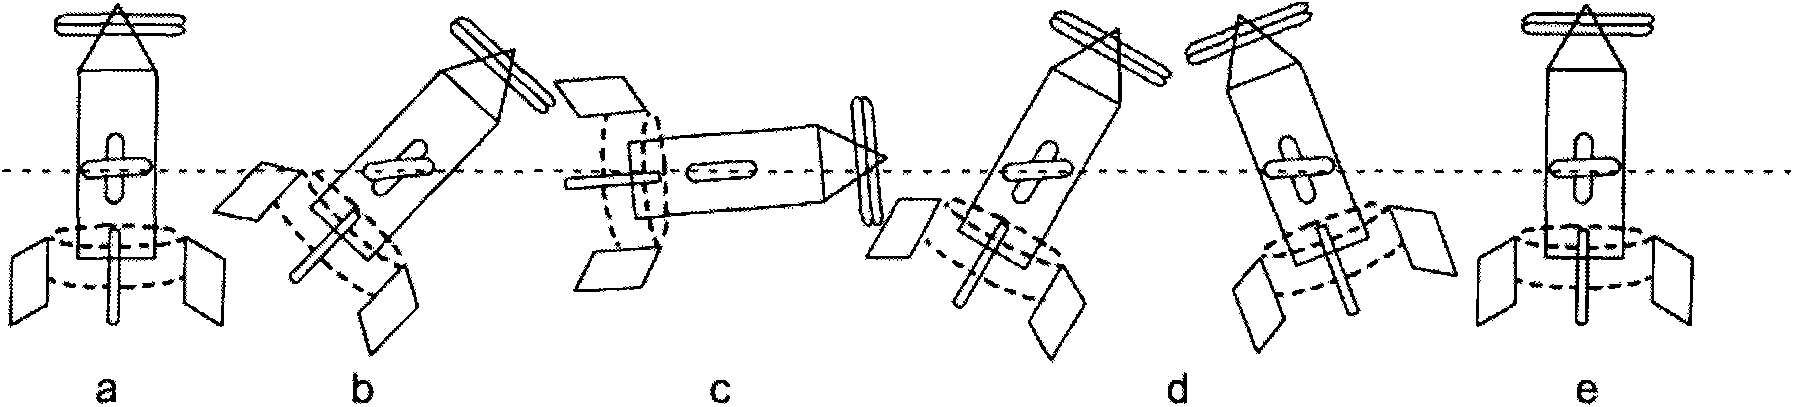 A composite rotating fixed-wing aircraft and its design method